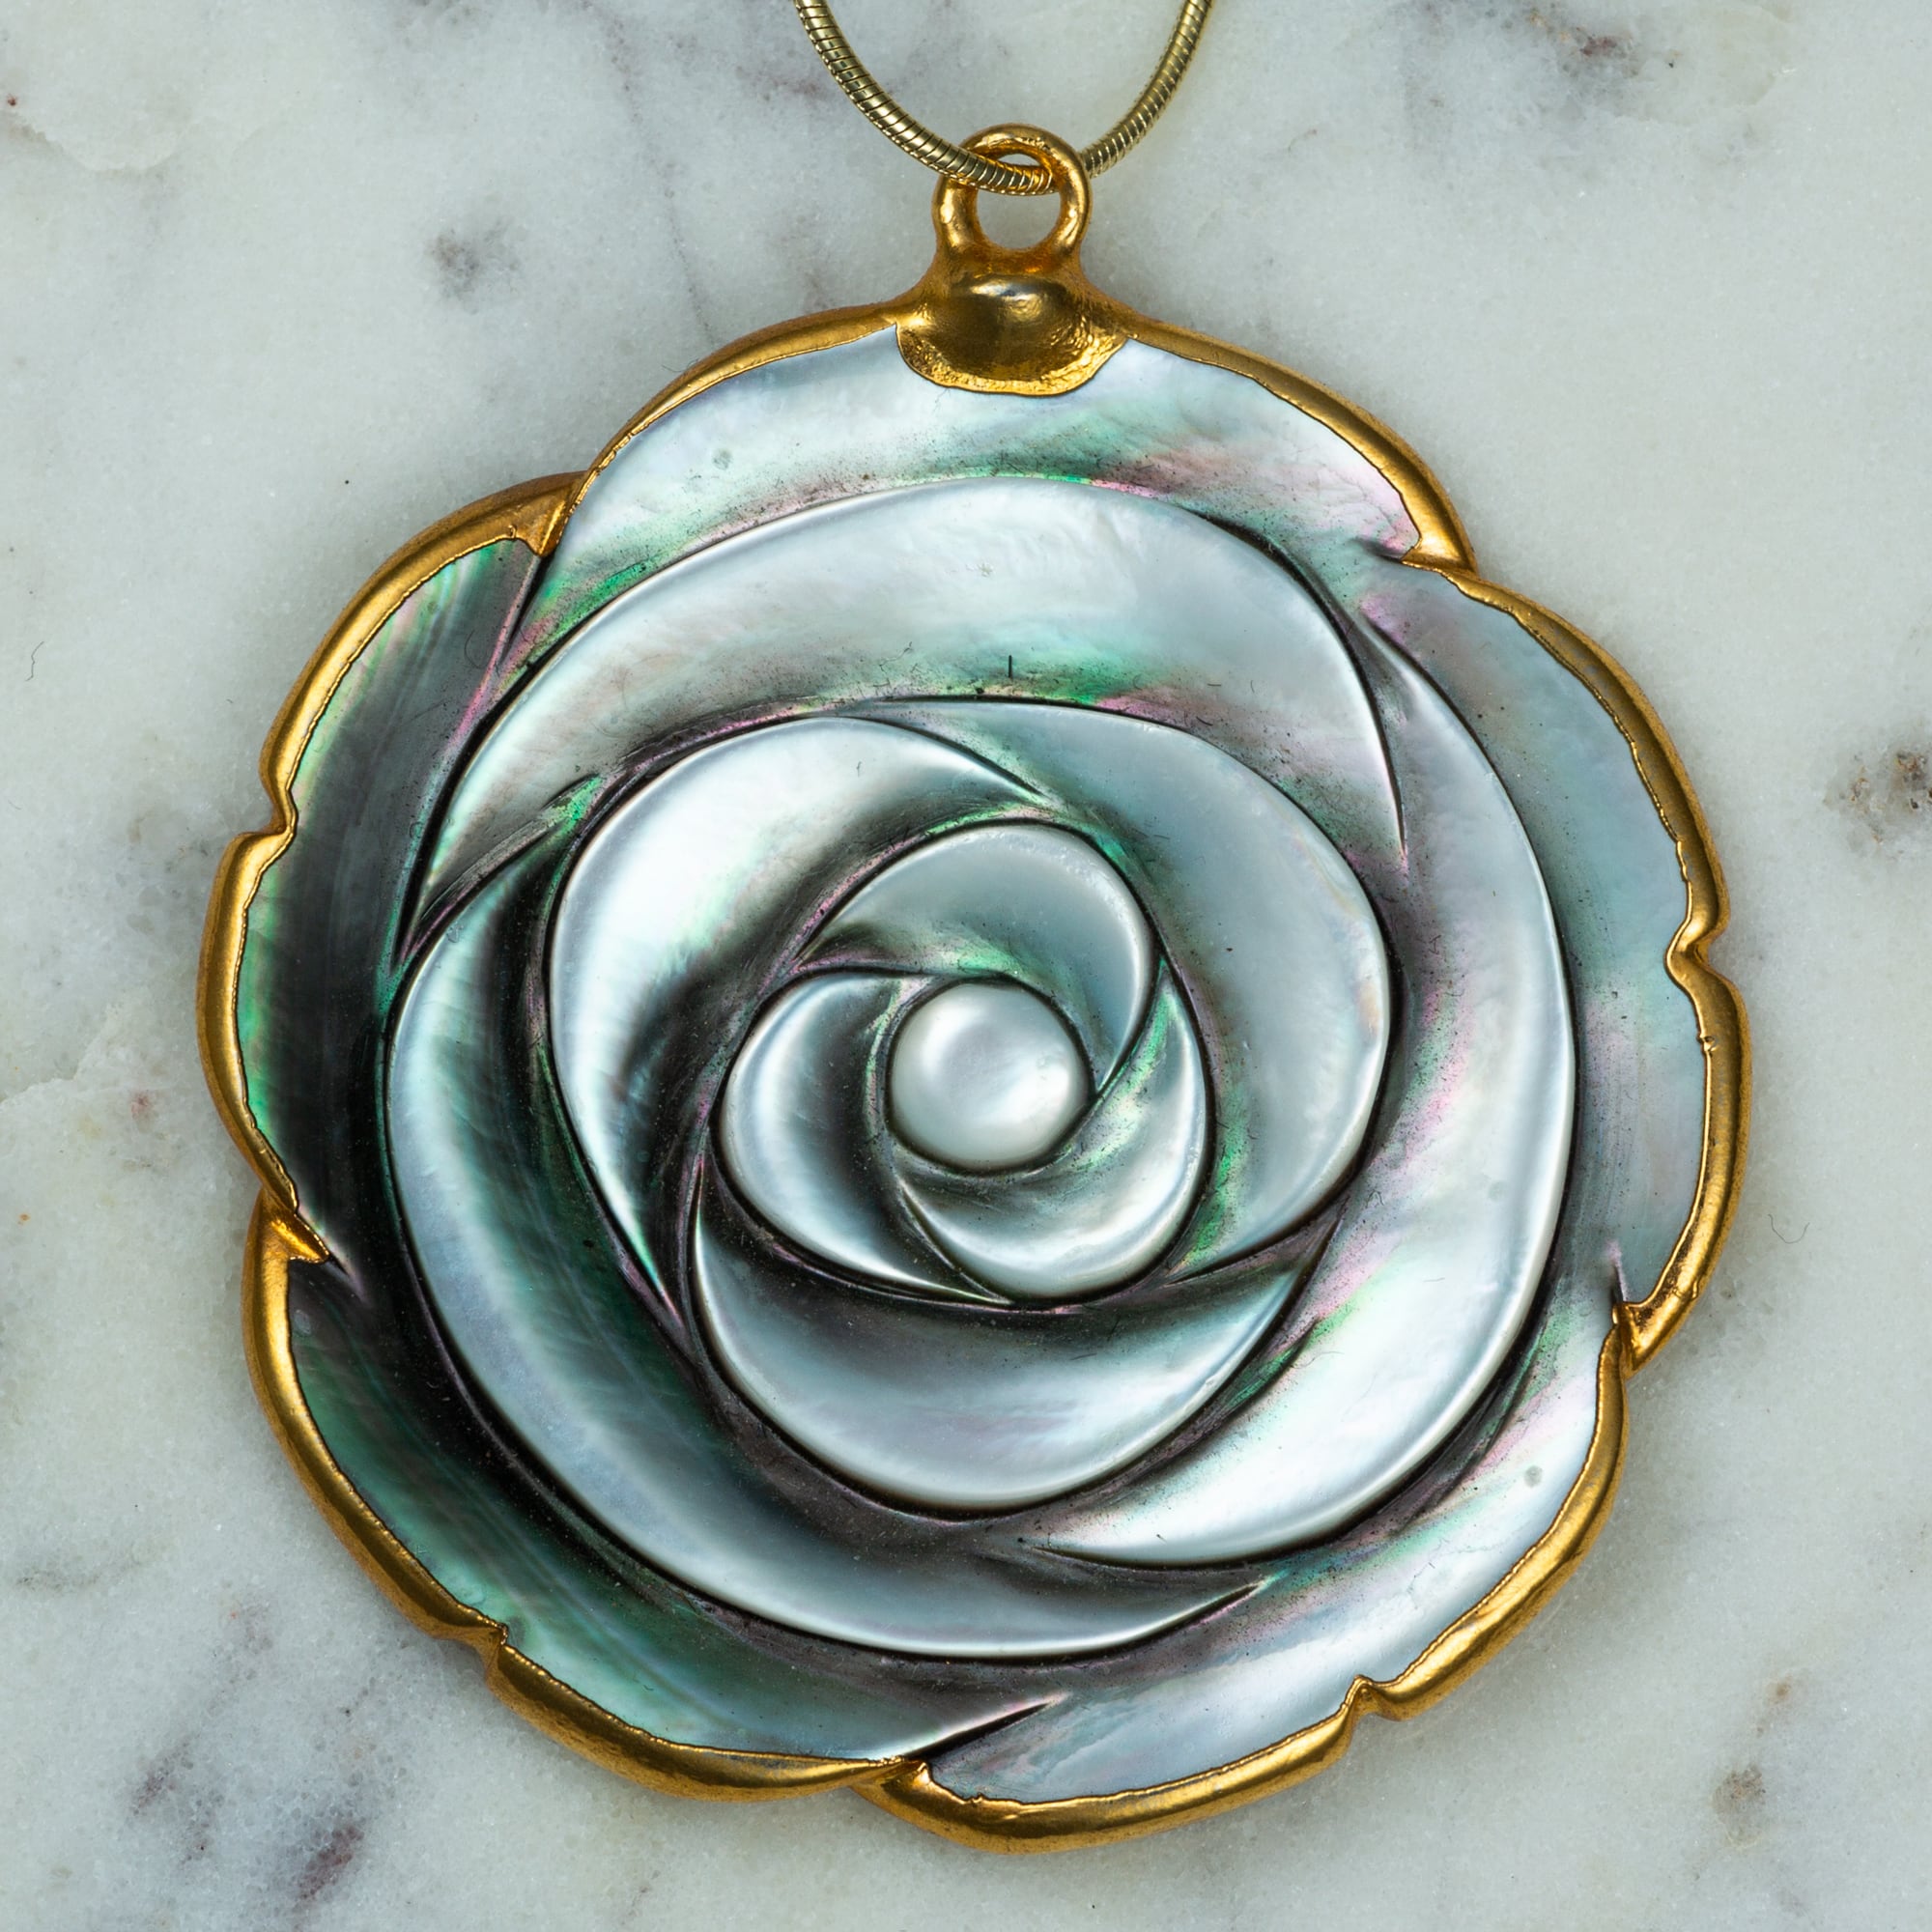 24k Gold Plated Rose Necklace - Necklaces